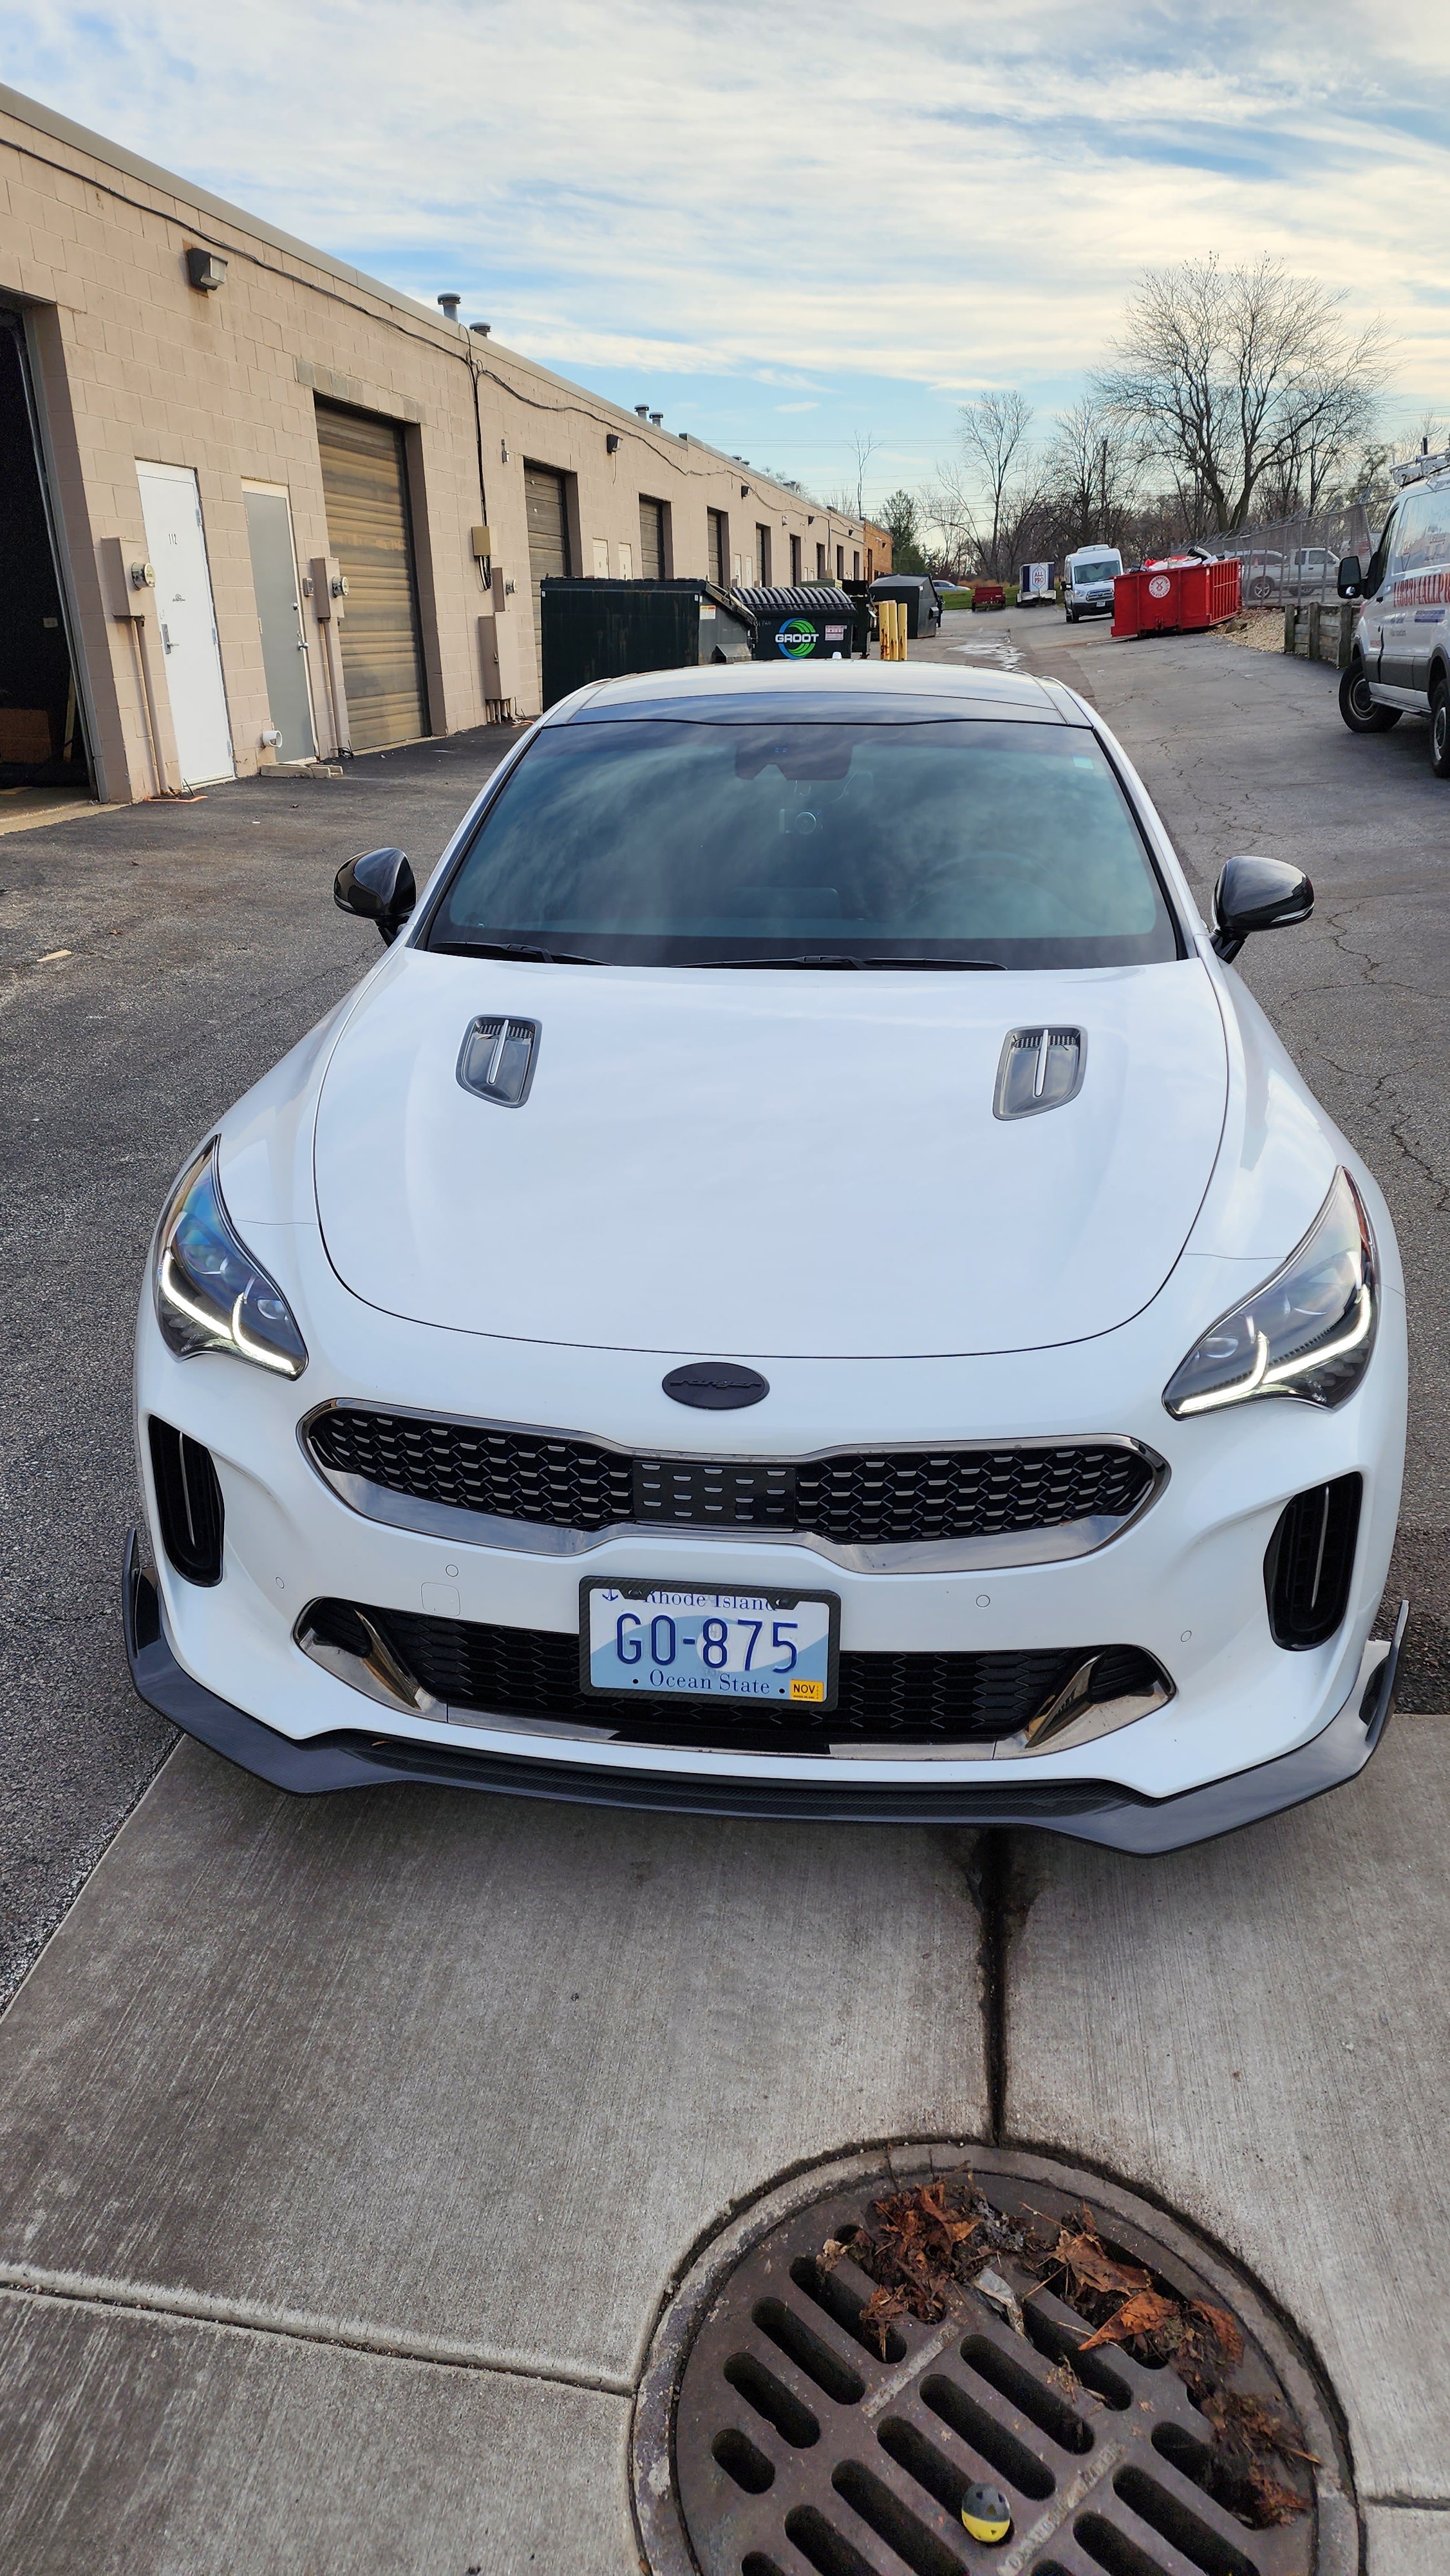 Frontal perspective of the Kia Stinger displaying Jalisco's CarbonFiber Front Lip, showing its impact on the vehicle's sporty appearance.